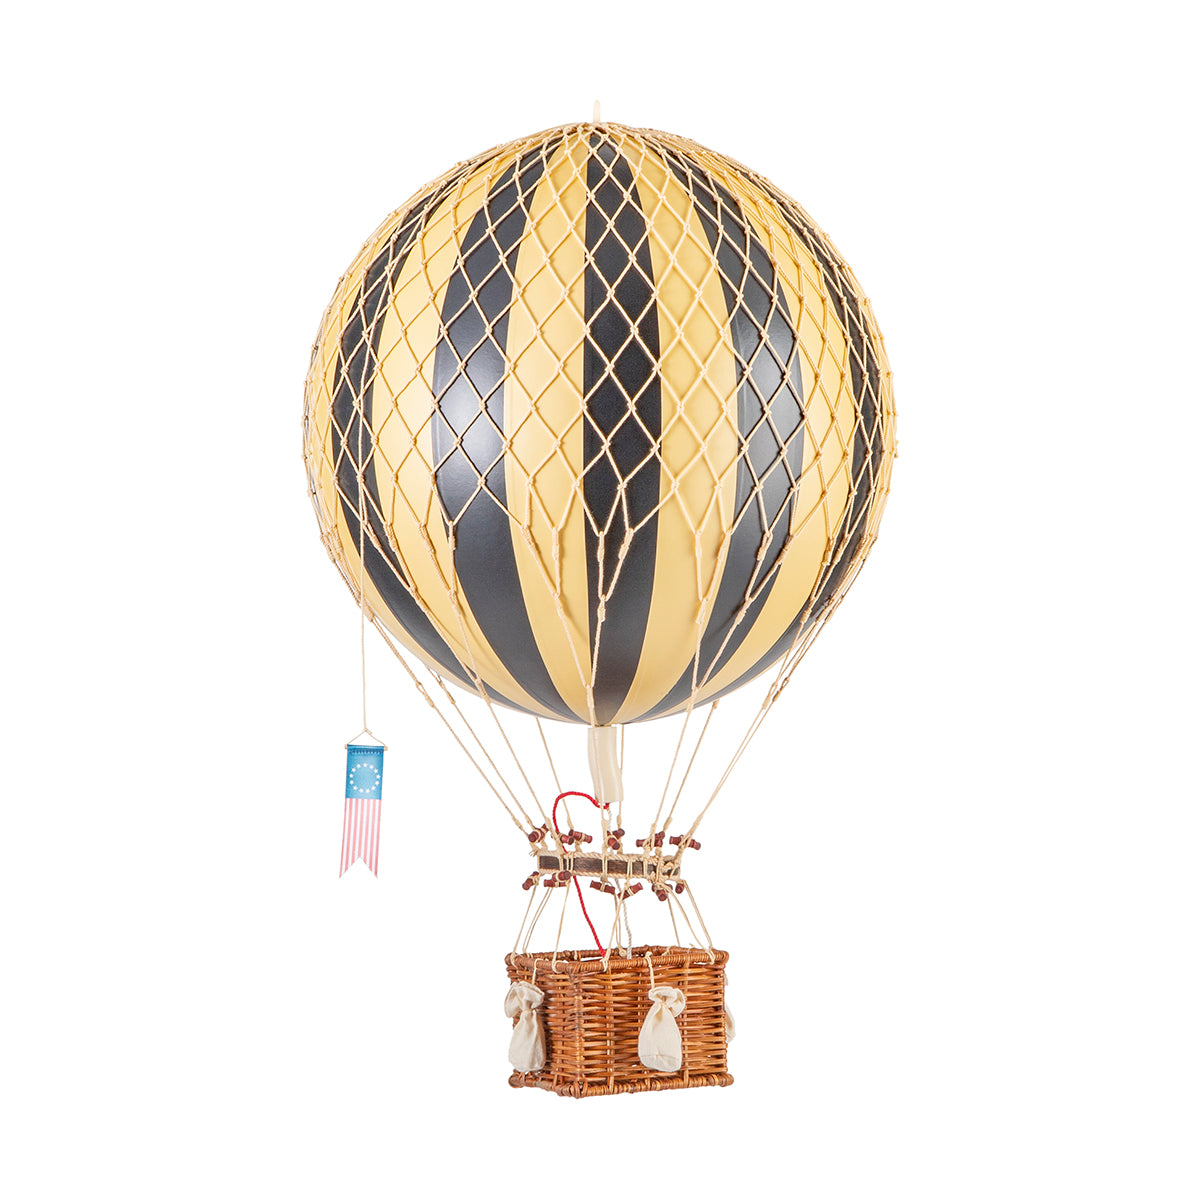 A Wonderen Medium Hot Air Balloon - Royal Aero offering a unique perspective from new heights.